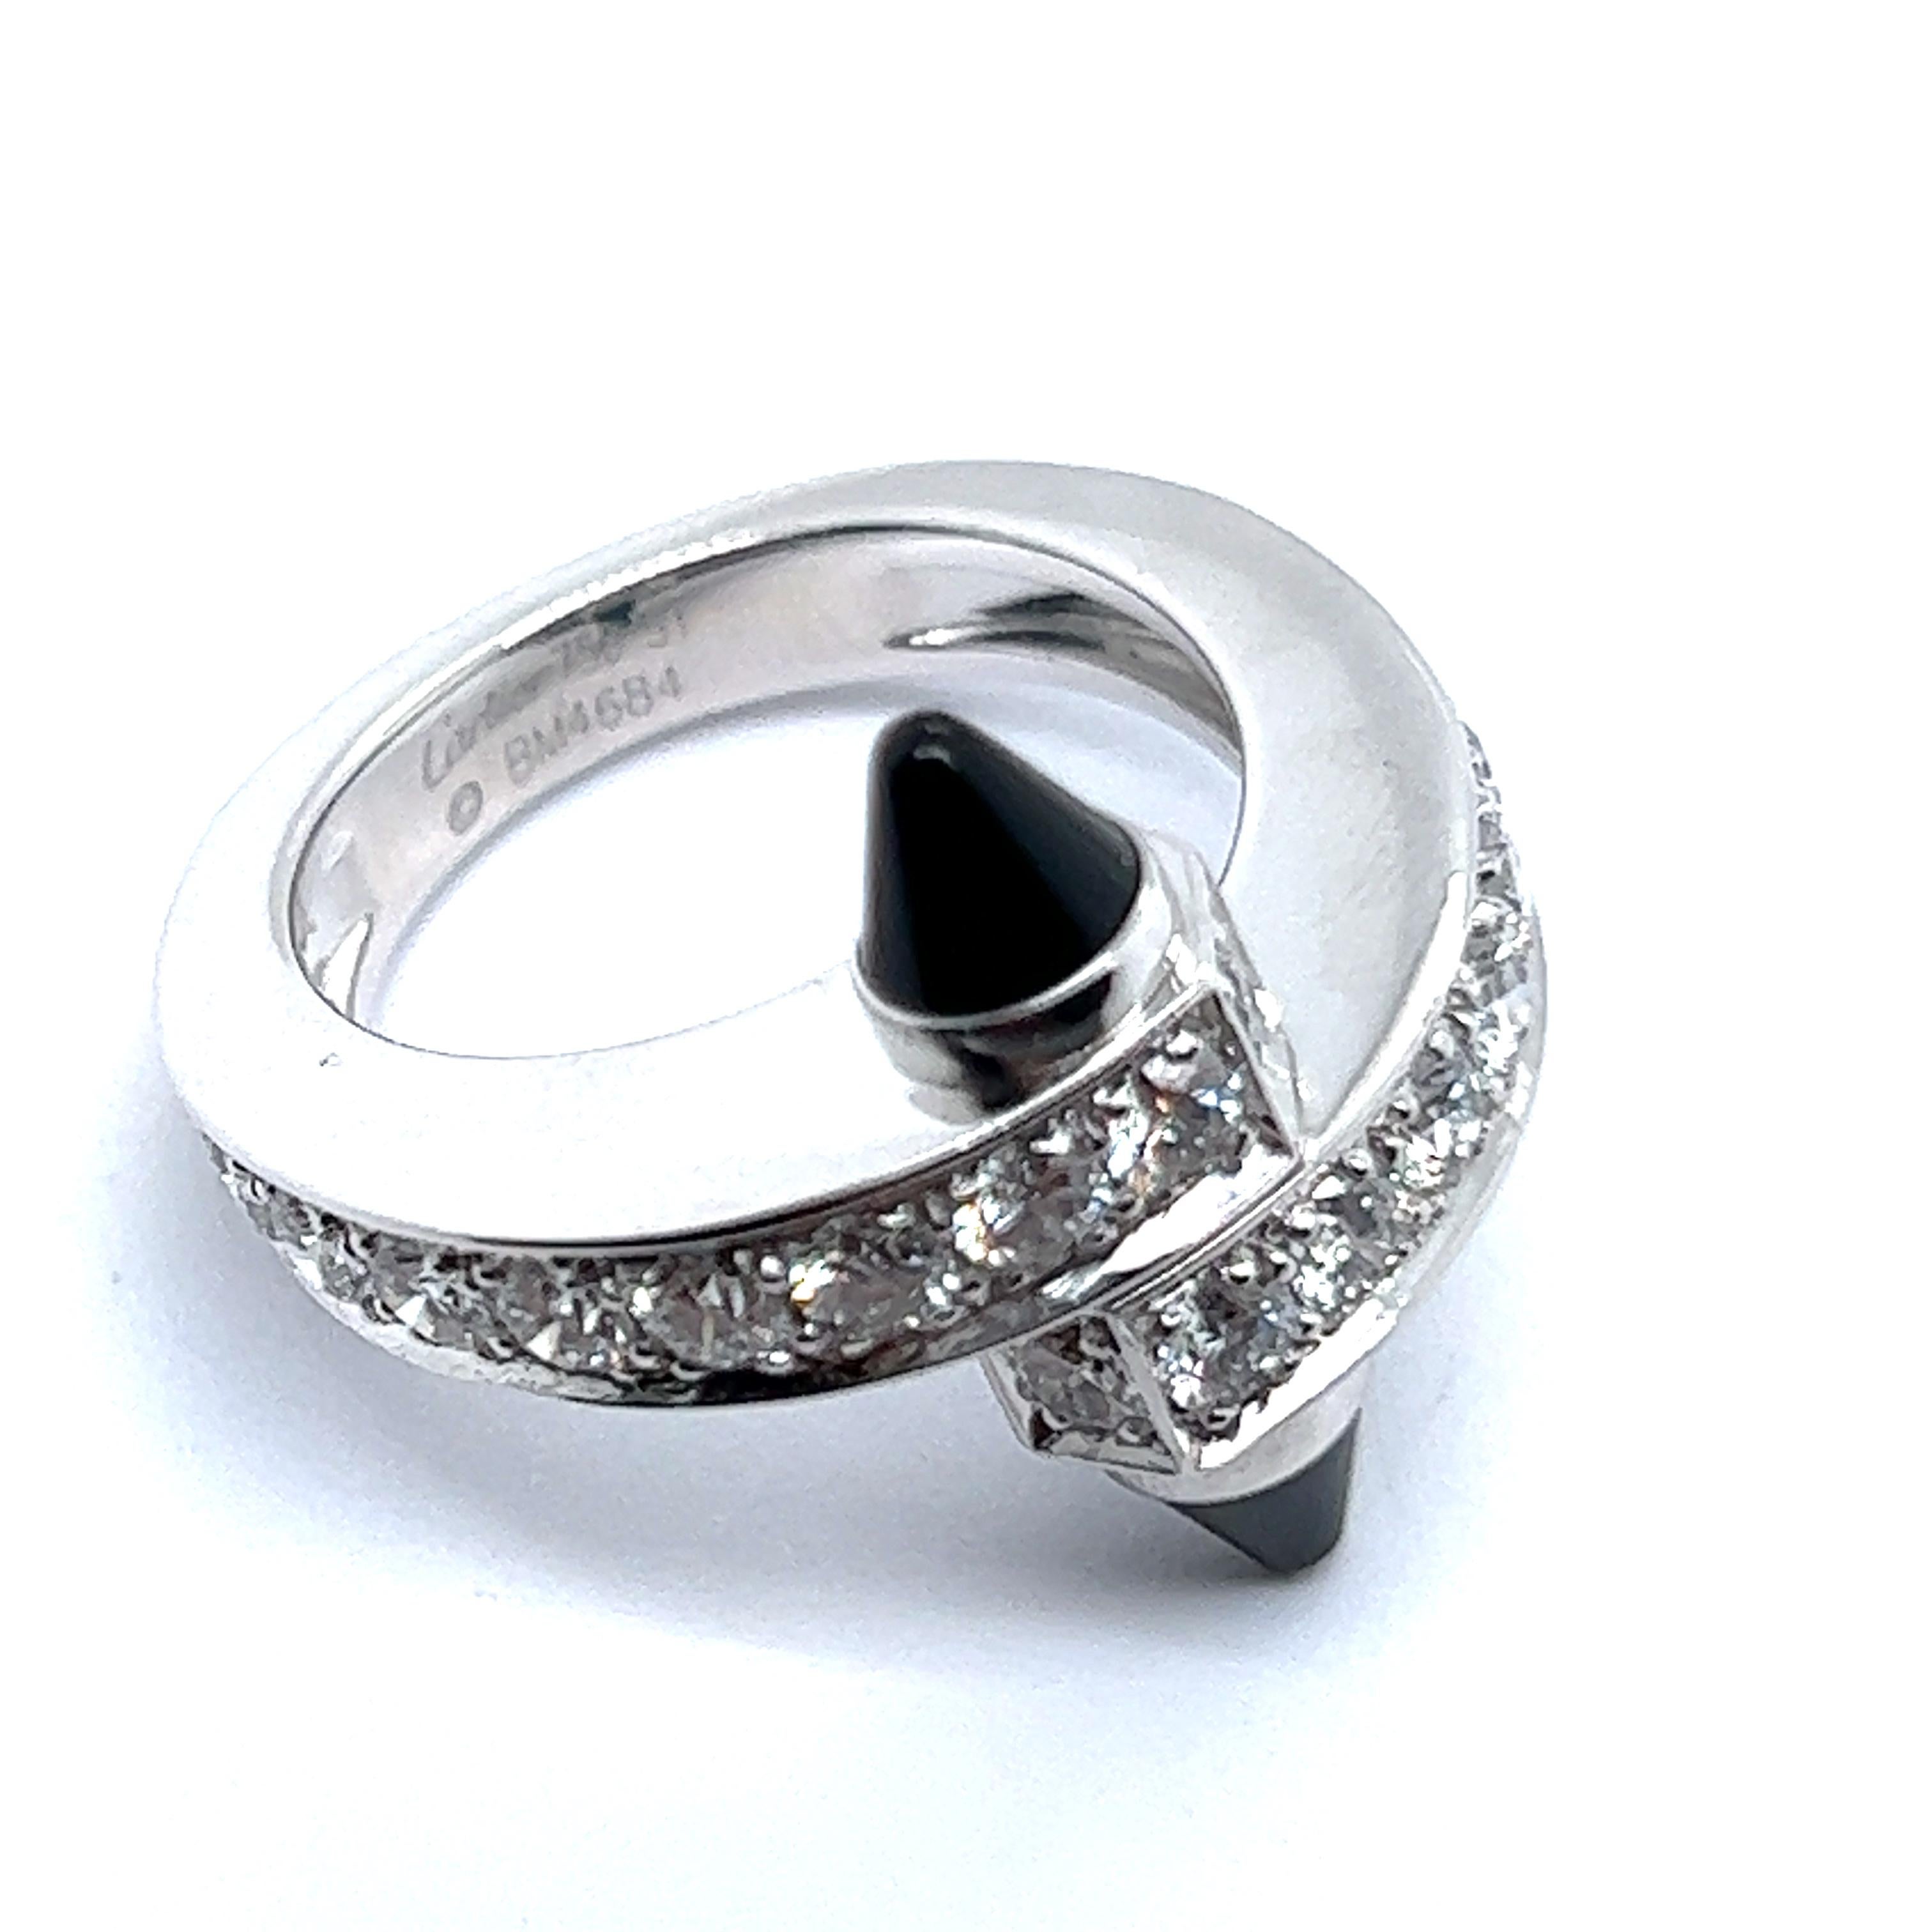 Women's or Men's Cartier Menotte Ring with Diamonds and Onyx in 18 Karat White Gold 